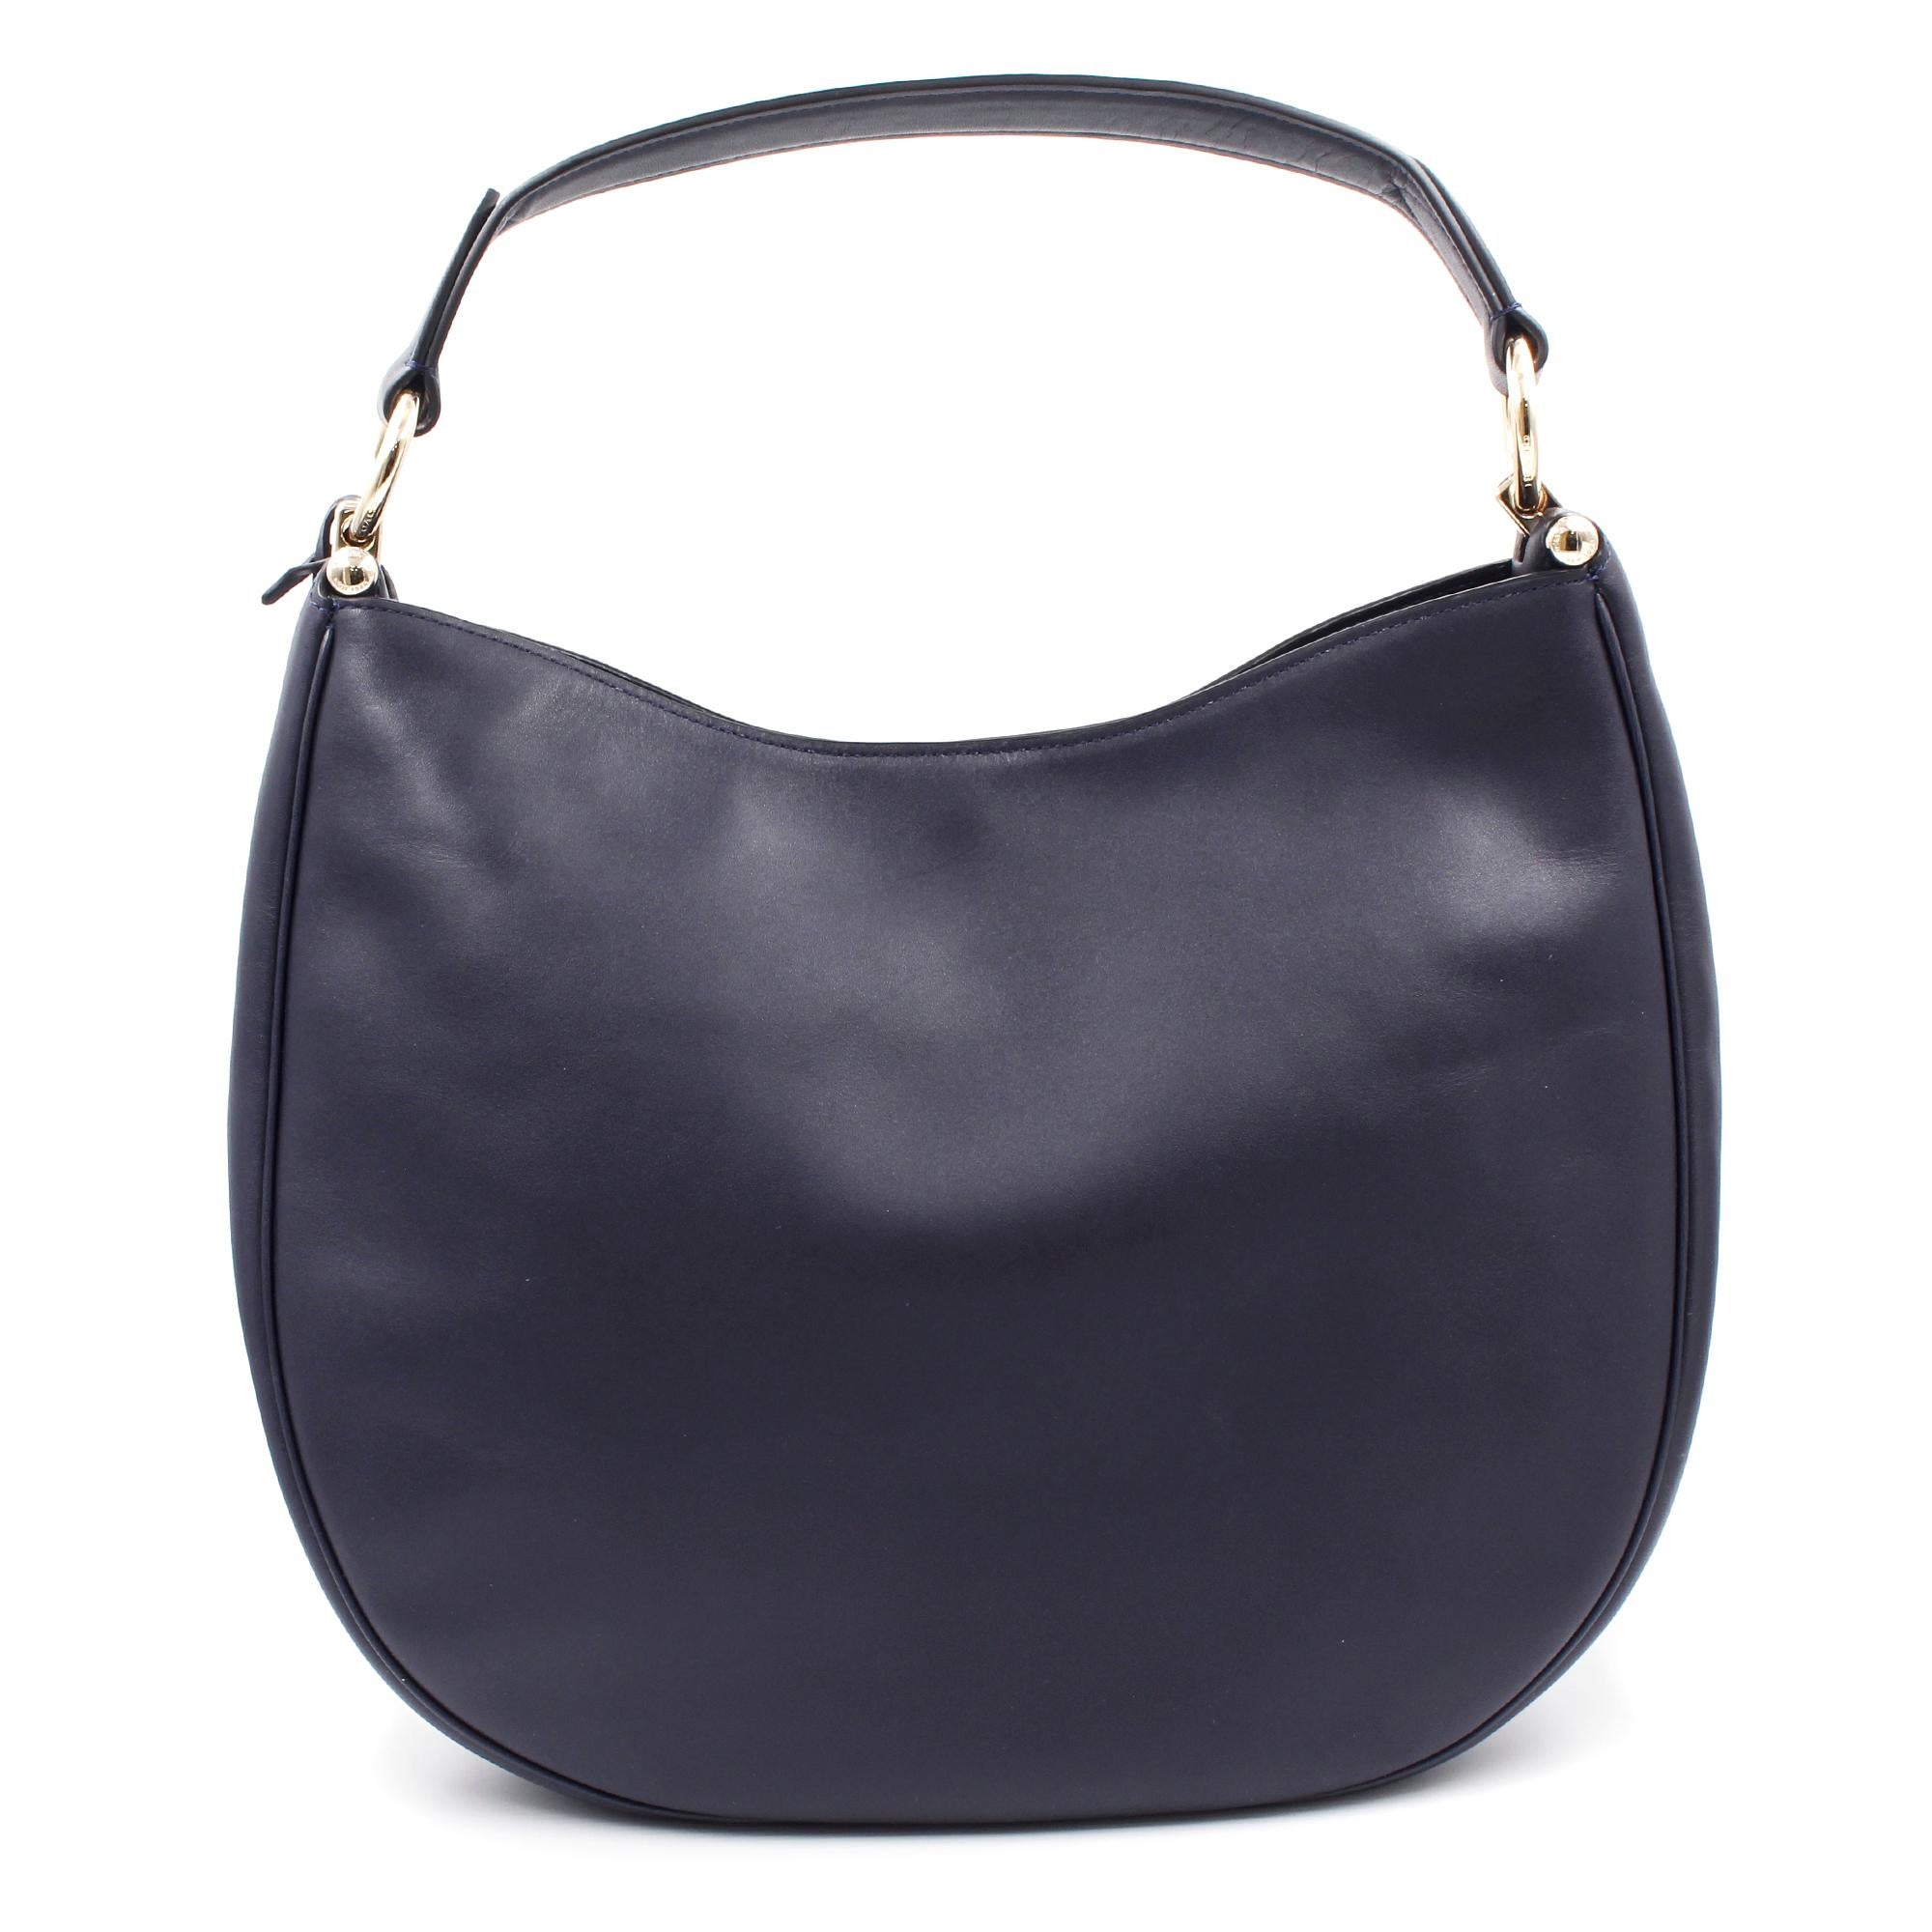 Soft and slouchy in supple glove-tanned leather, this simple, graceful silhouette is dressed up with striking hardware, including a polished metal bag charm. Featuring multiple wear straps to polish off any look.
Made of leather.
Magnetic snap